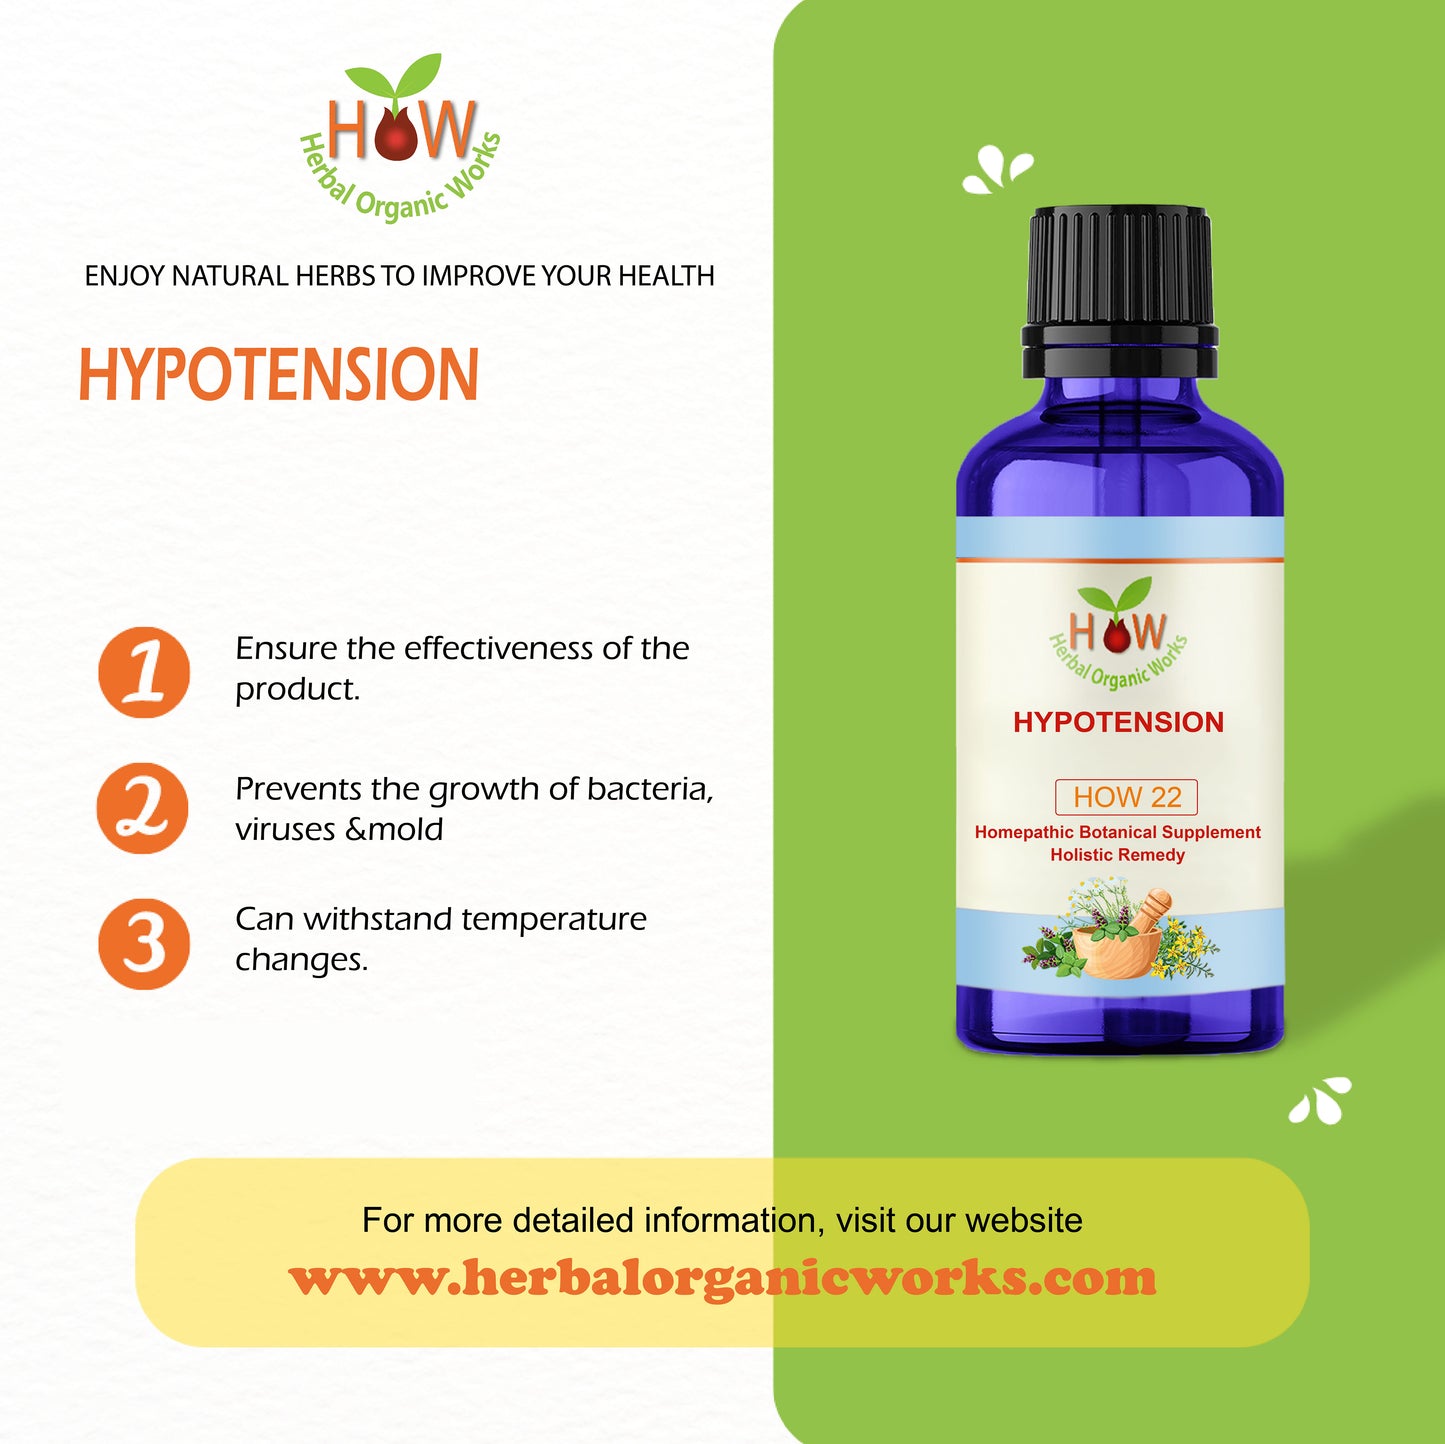 NATURAL REMEDY FOR HYPOTENSION (HOW22)